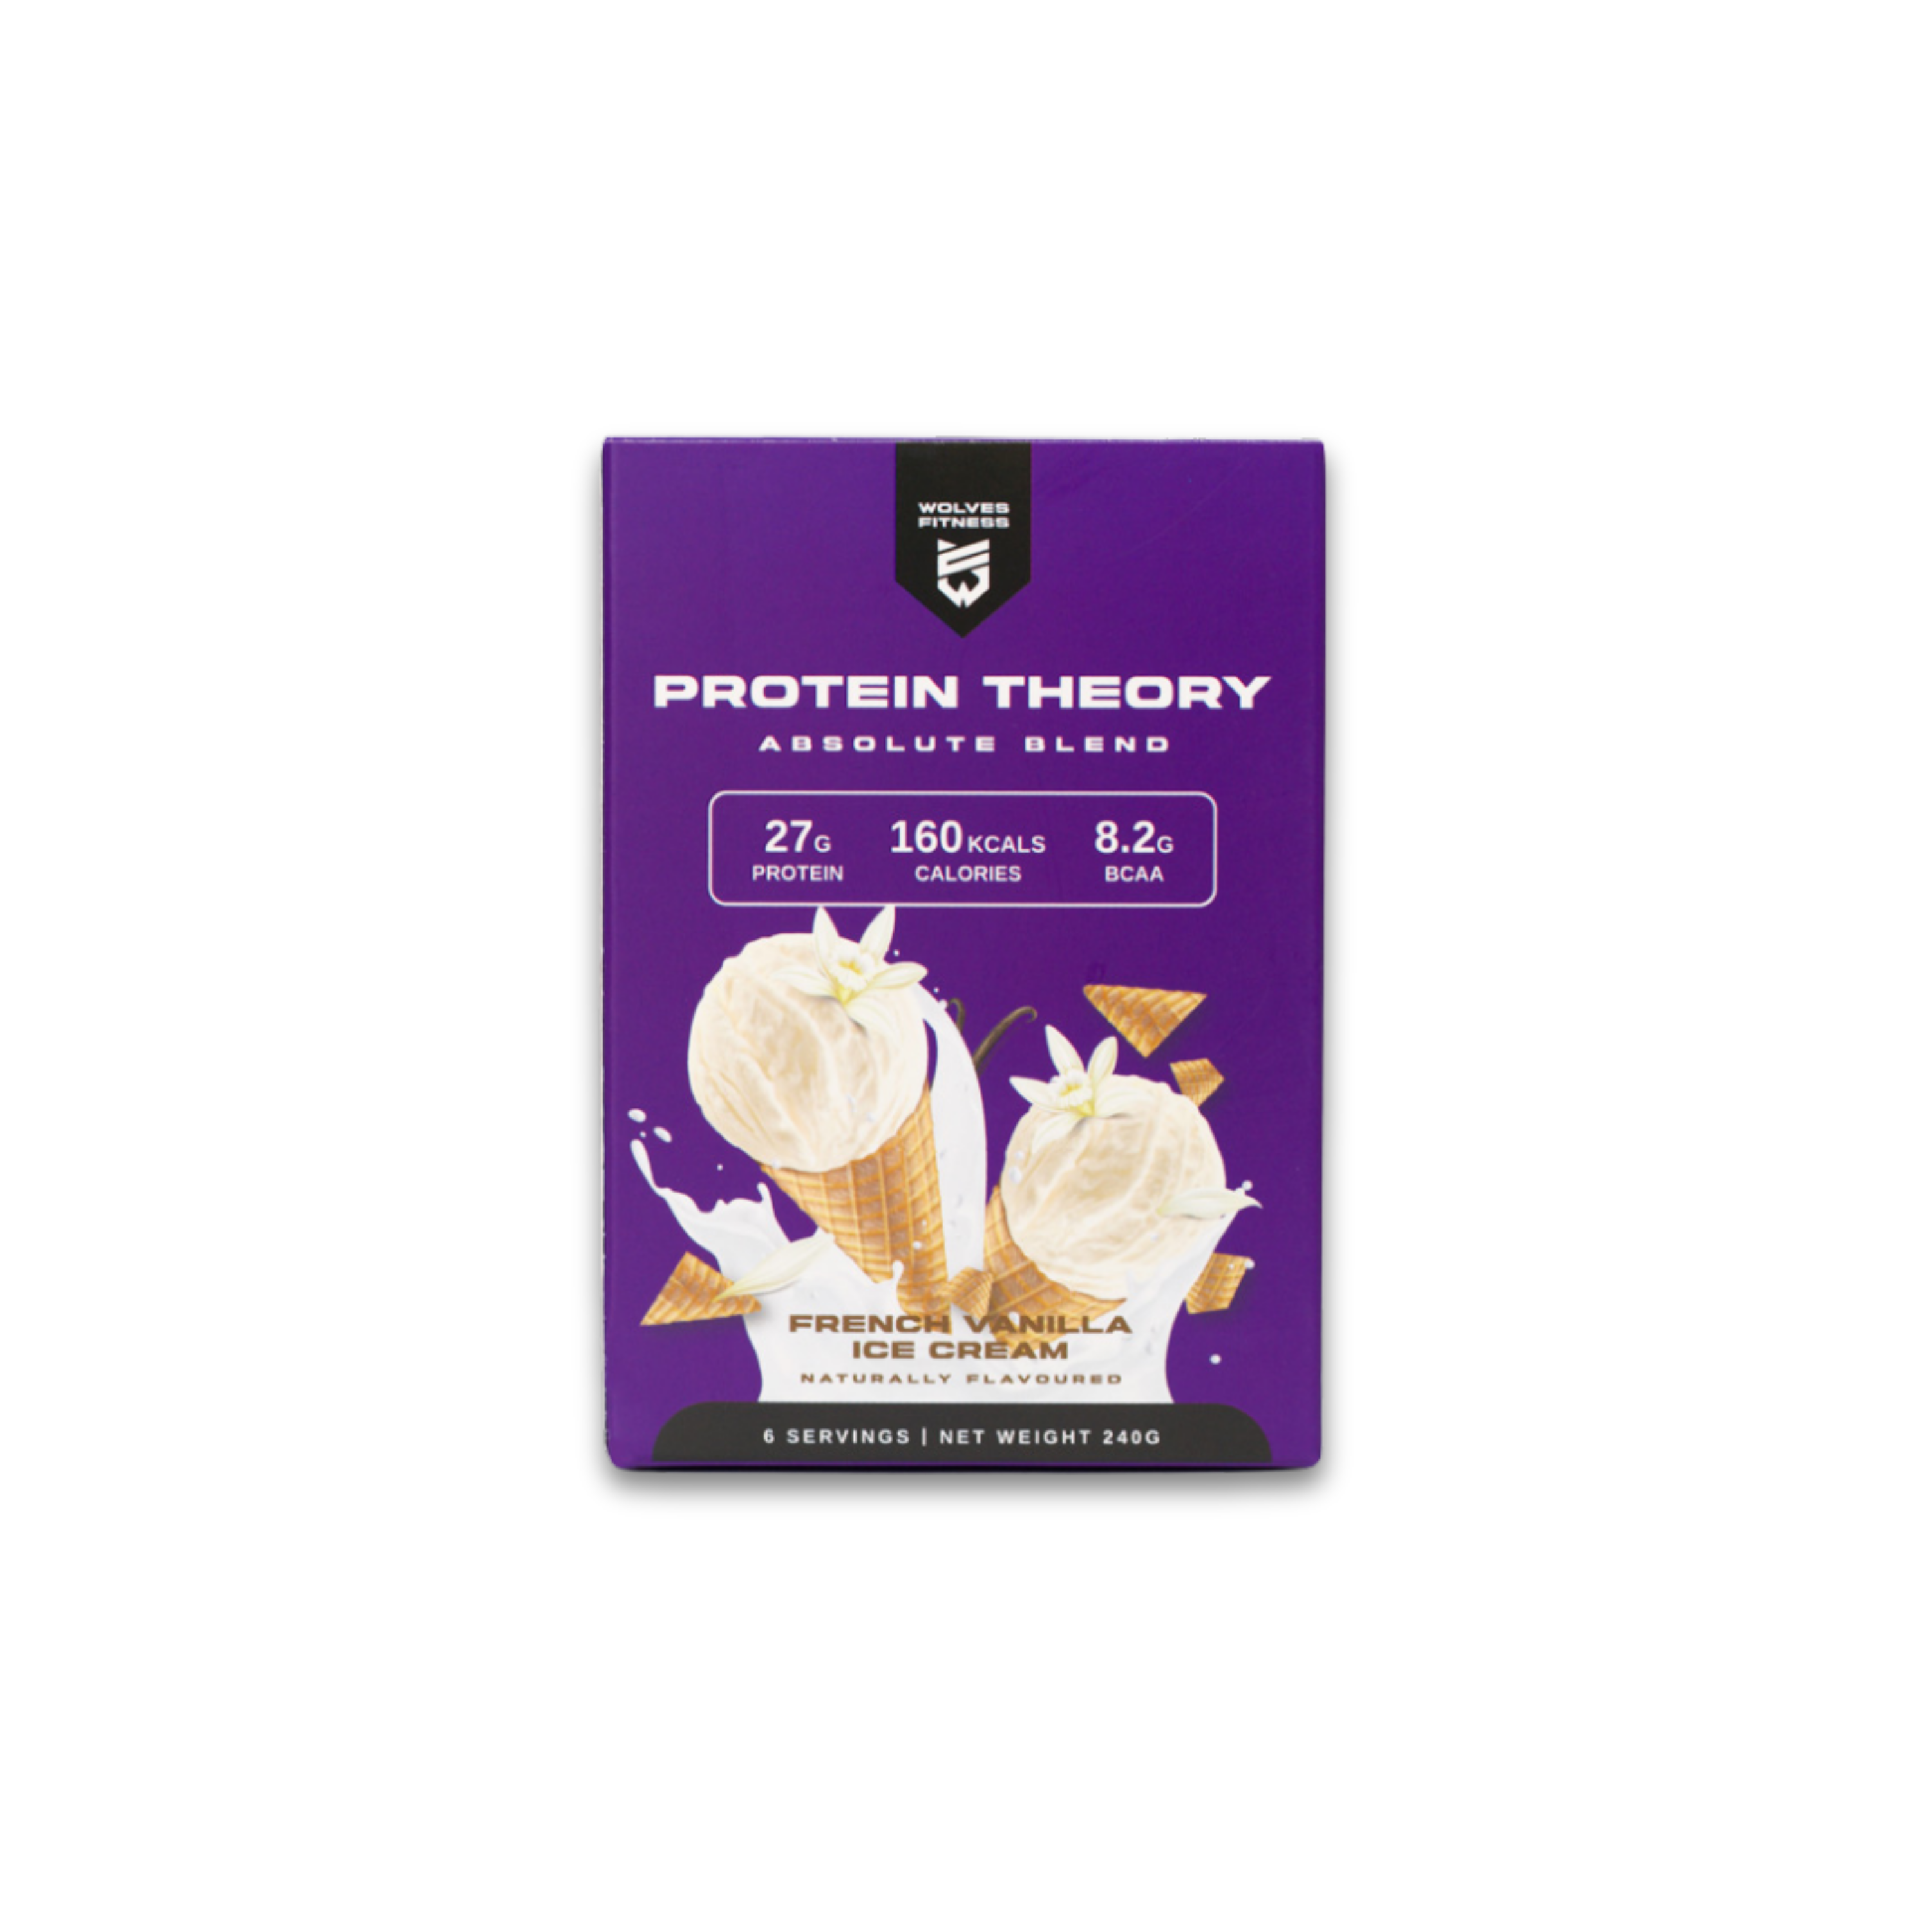 [240g Sachets] PROTEIN THEORY - Absolute Blend (FRENCH VANILLA ICE CREAM)